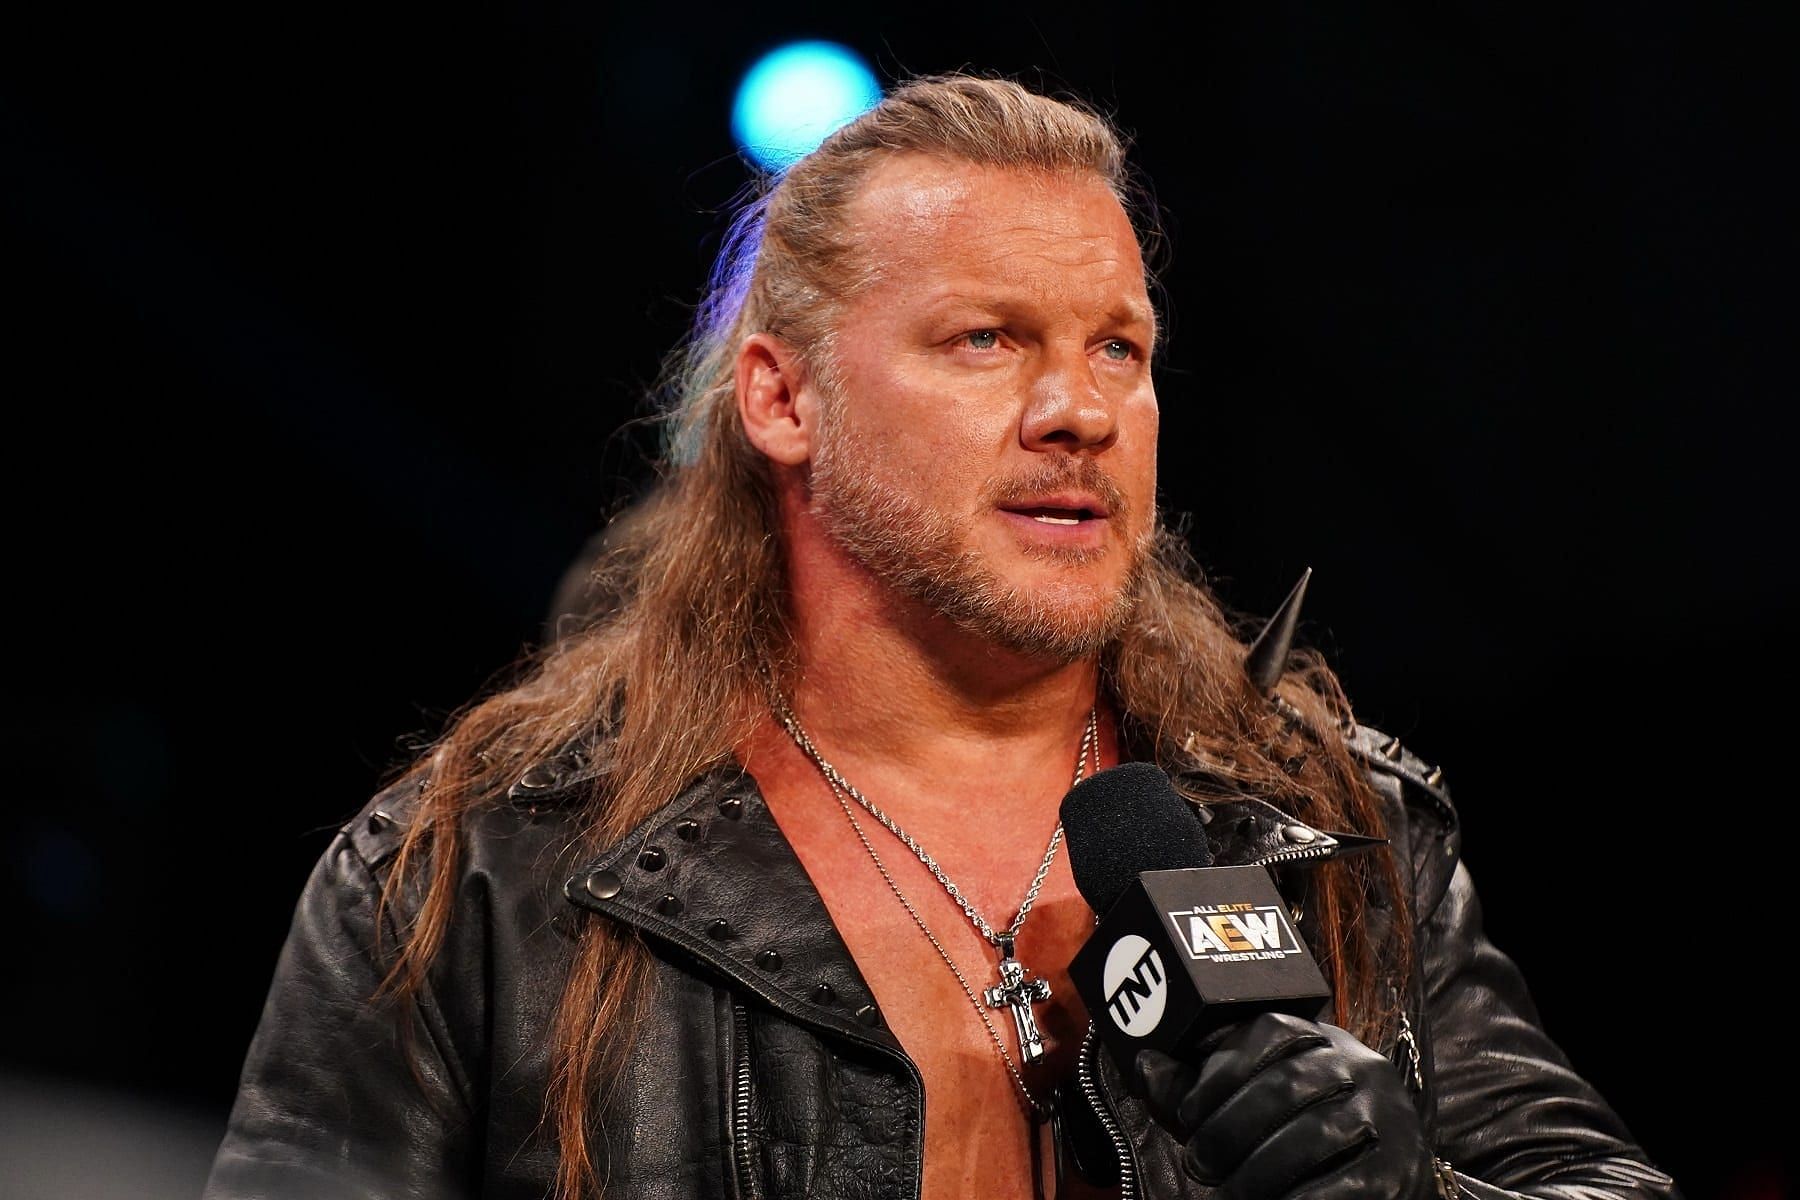 Chris Jericho has worked in both AEW and WWE.